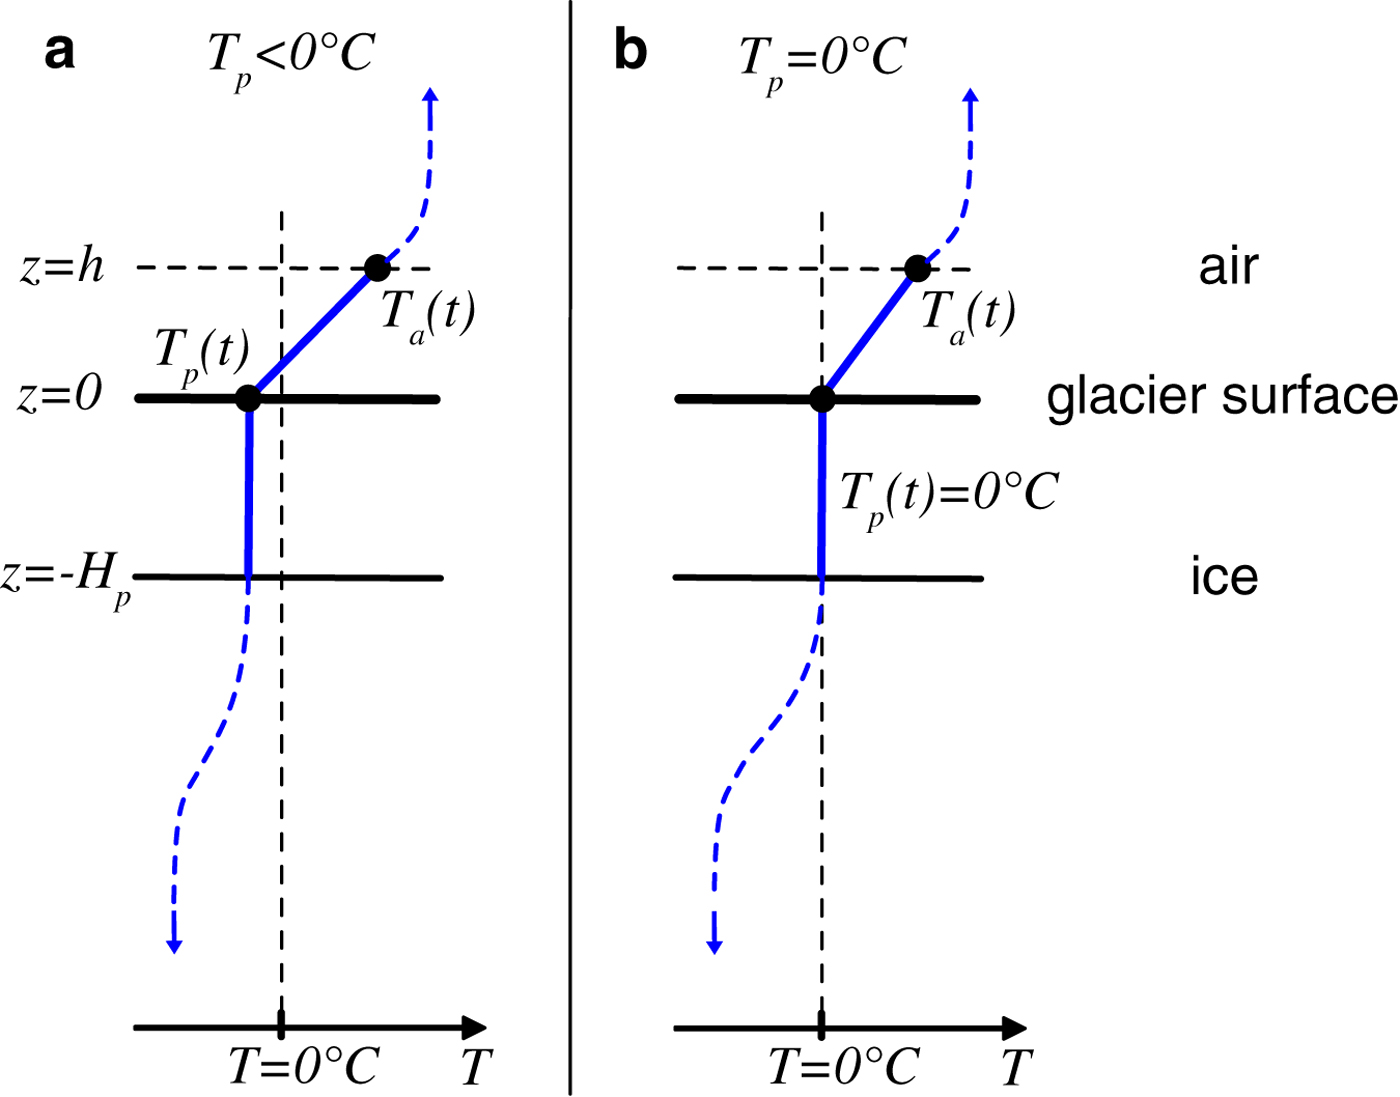 A Simple Physics Based Improvement To The Positive Degree Day Model Journal Of Glaciology Cambridge Core